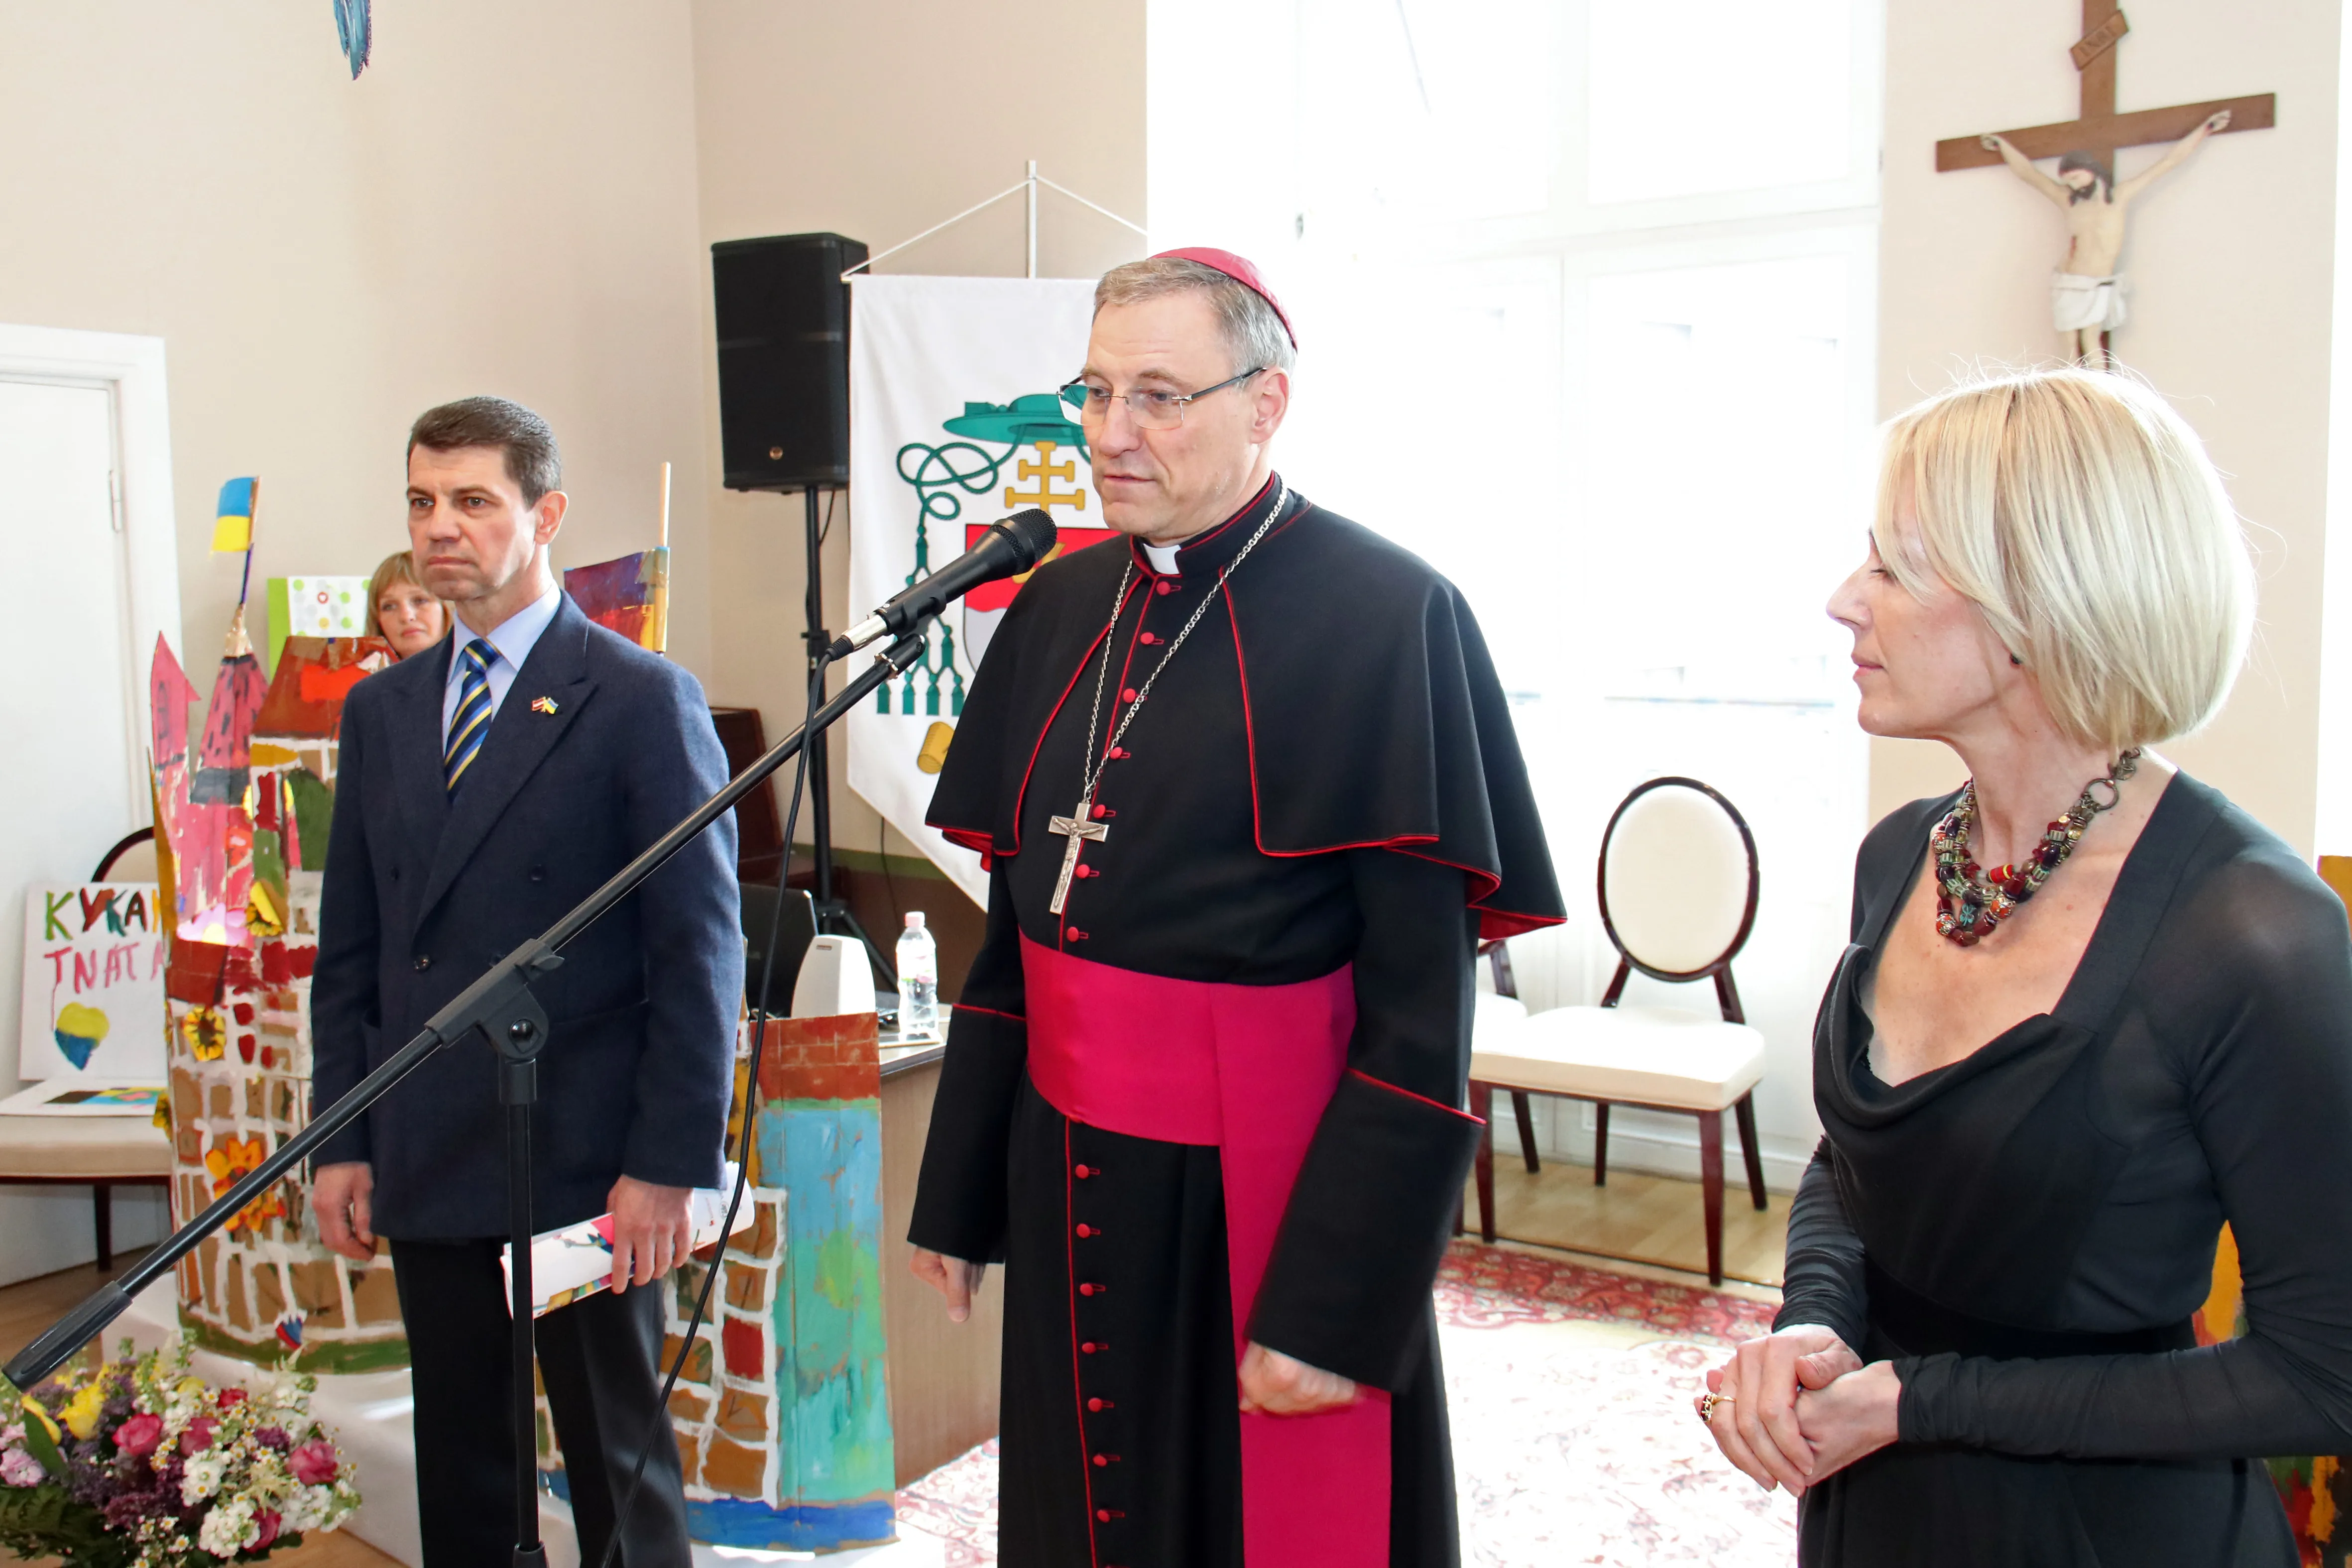 Archbishop Zbigņev Stankevičs gives an opening speech at the exhibition, flanked by Olexandr Mischenko, Ukrainian ambassador to Latvia, and Gabriella Cabiere, curator of the exhibit. Archdiocese of Riga